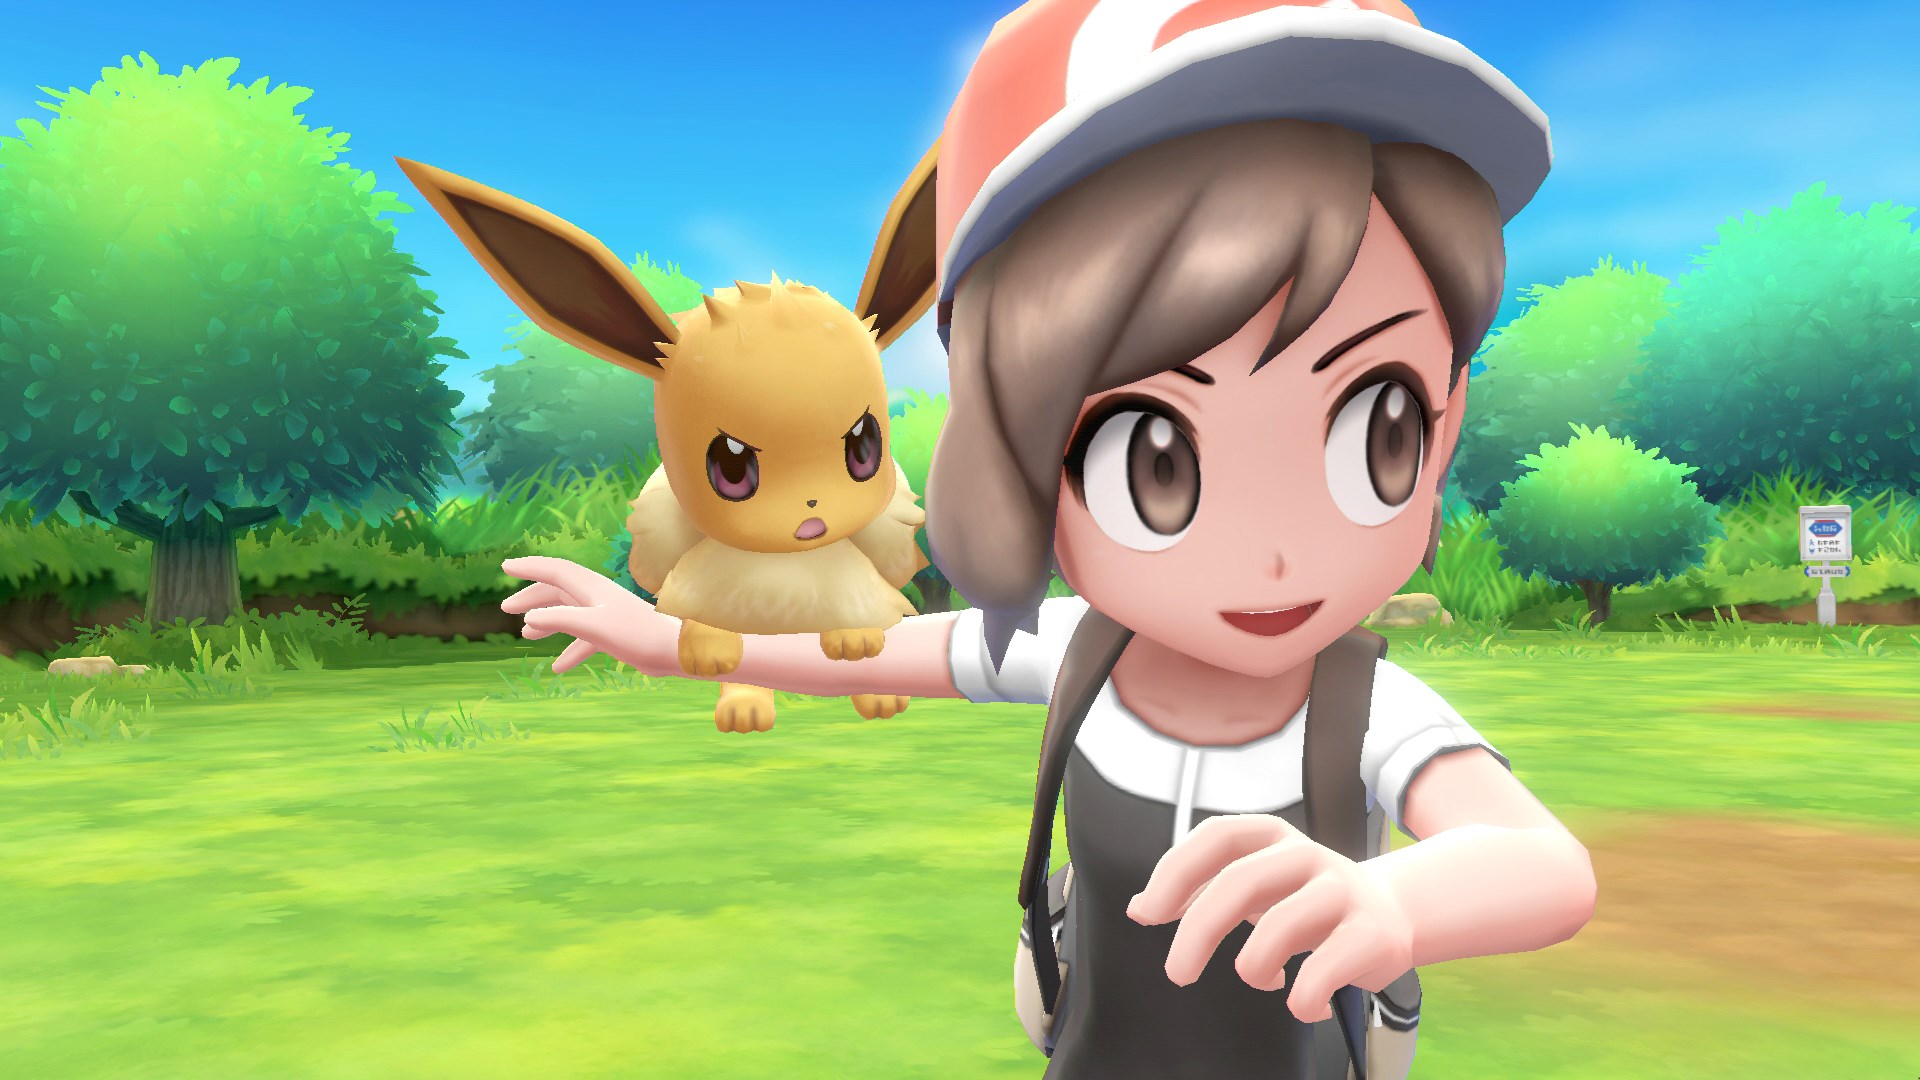 Pokémon Lets Go Pikachu And Eevee Demo Impressions From